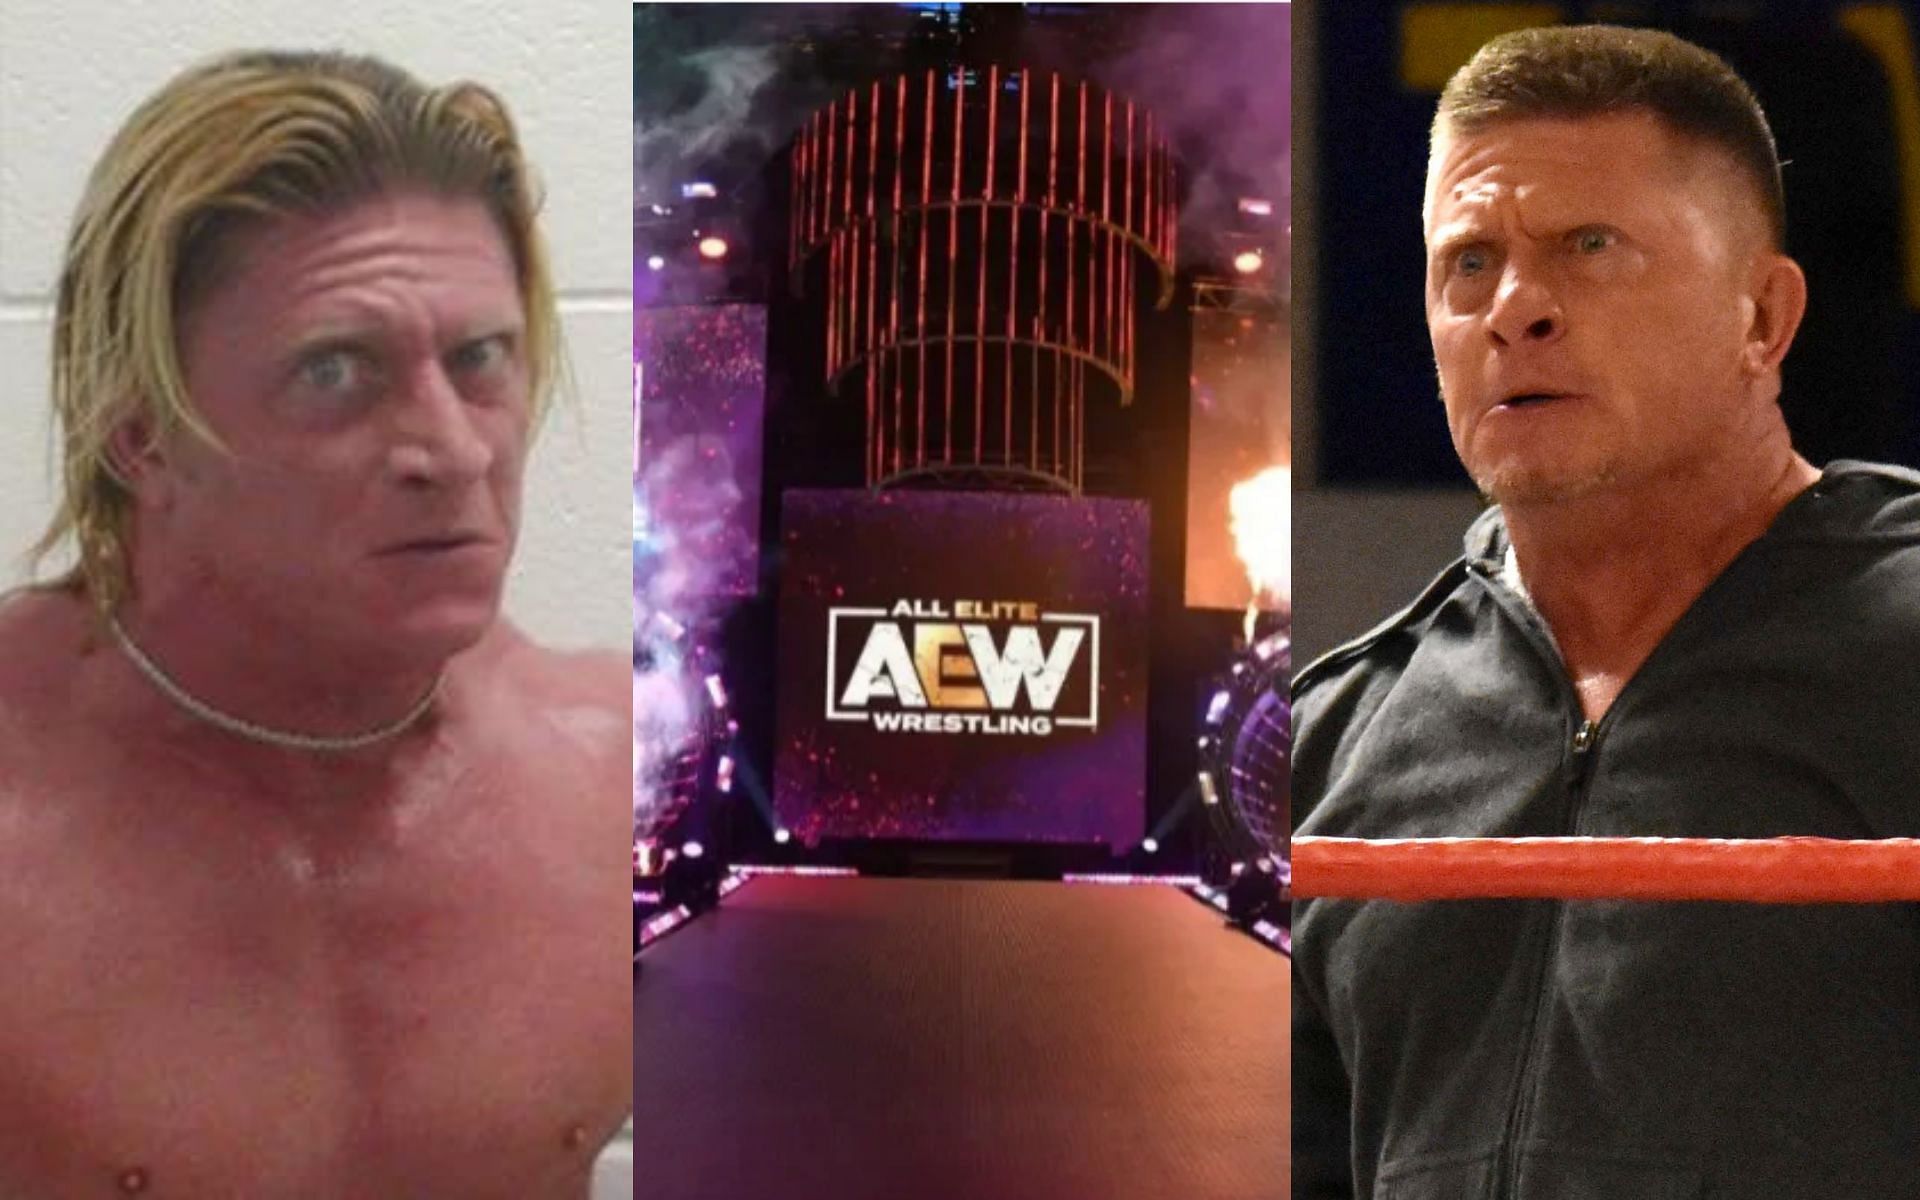 Ace Steel was associated with AEW since earlier this year